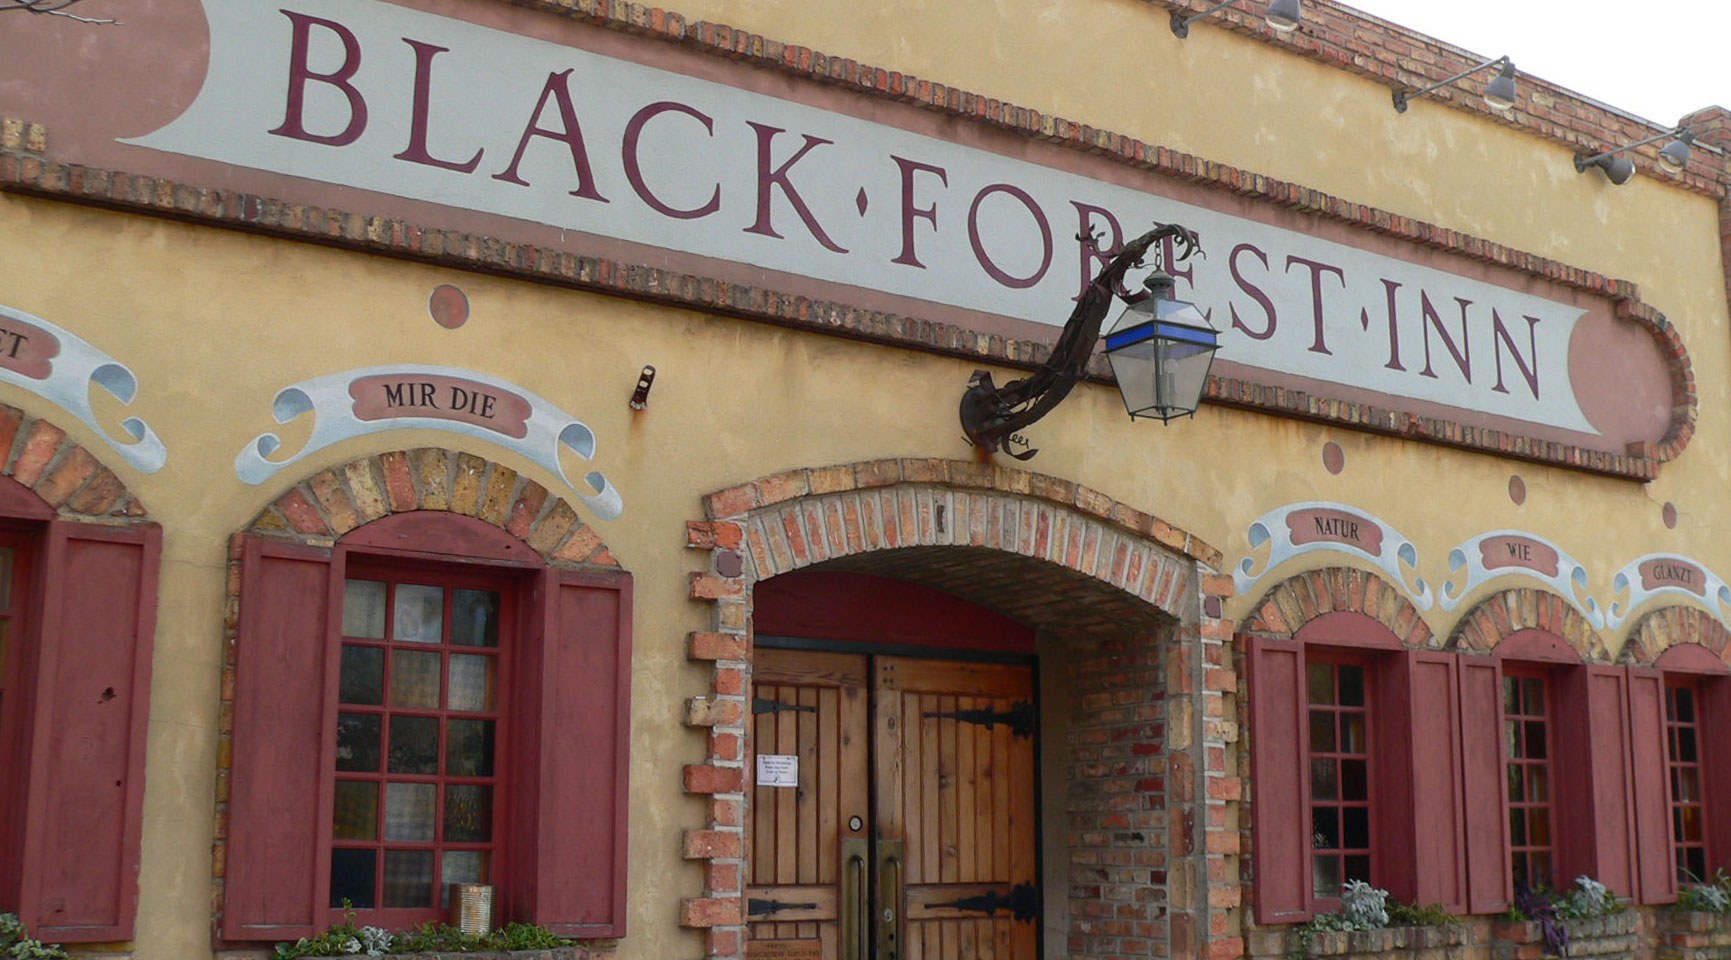 outside sign and front door of black forest inn